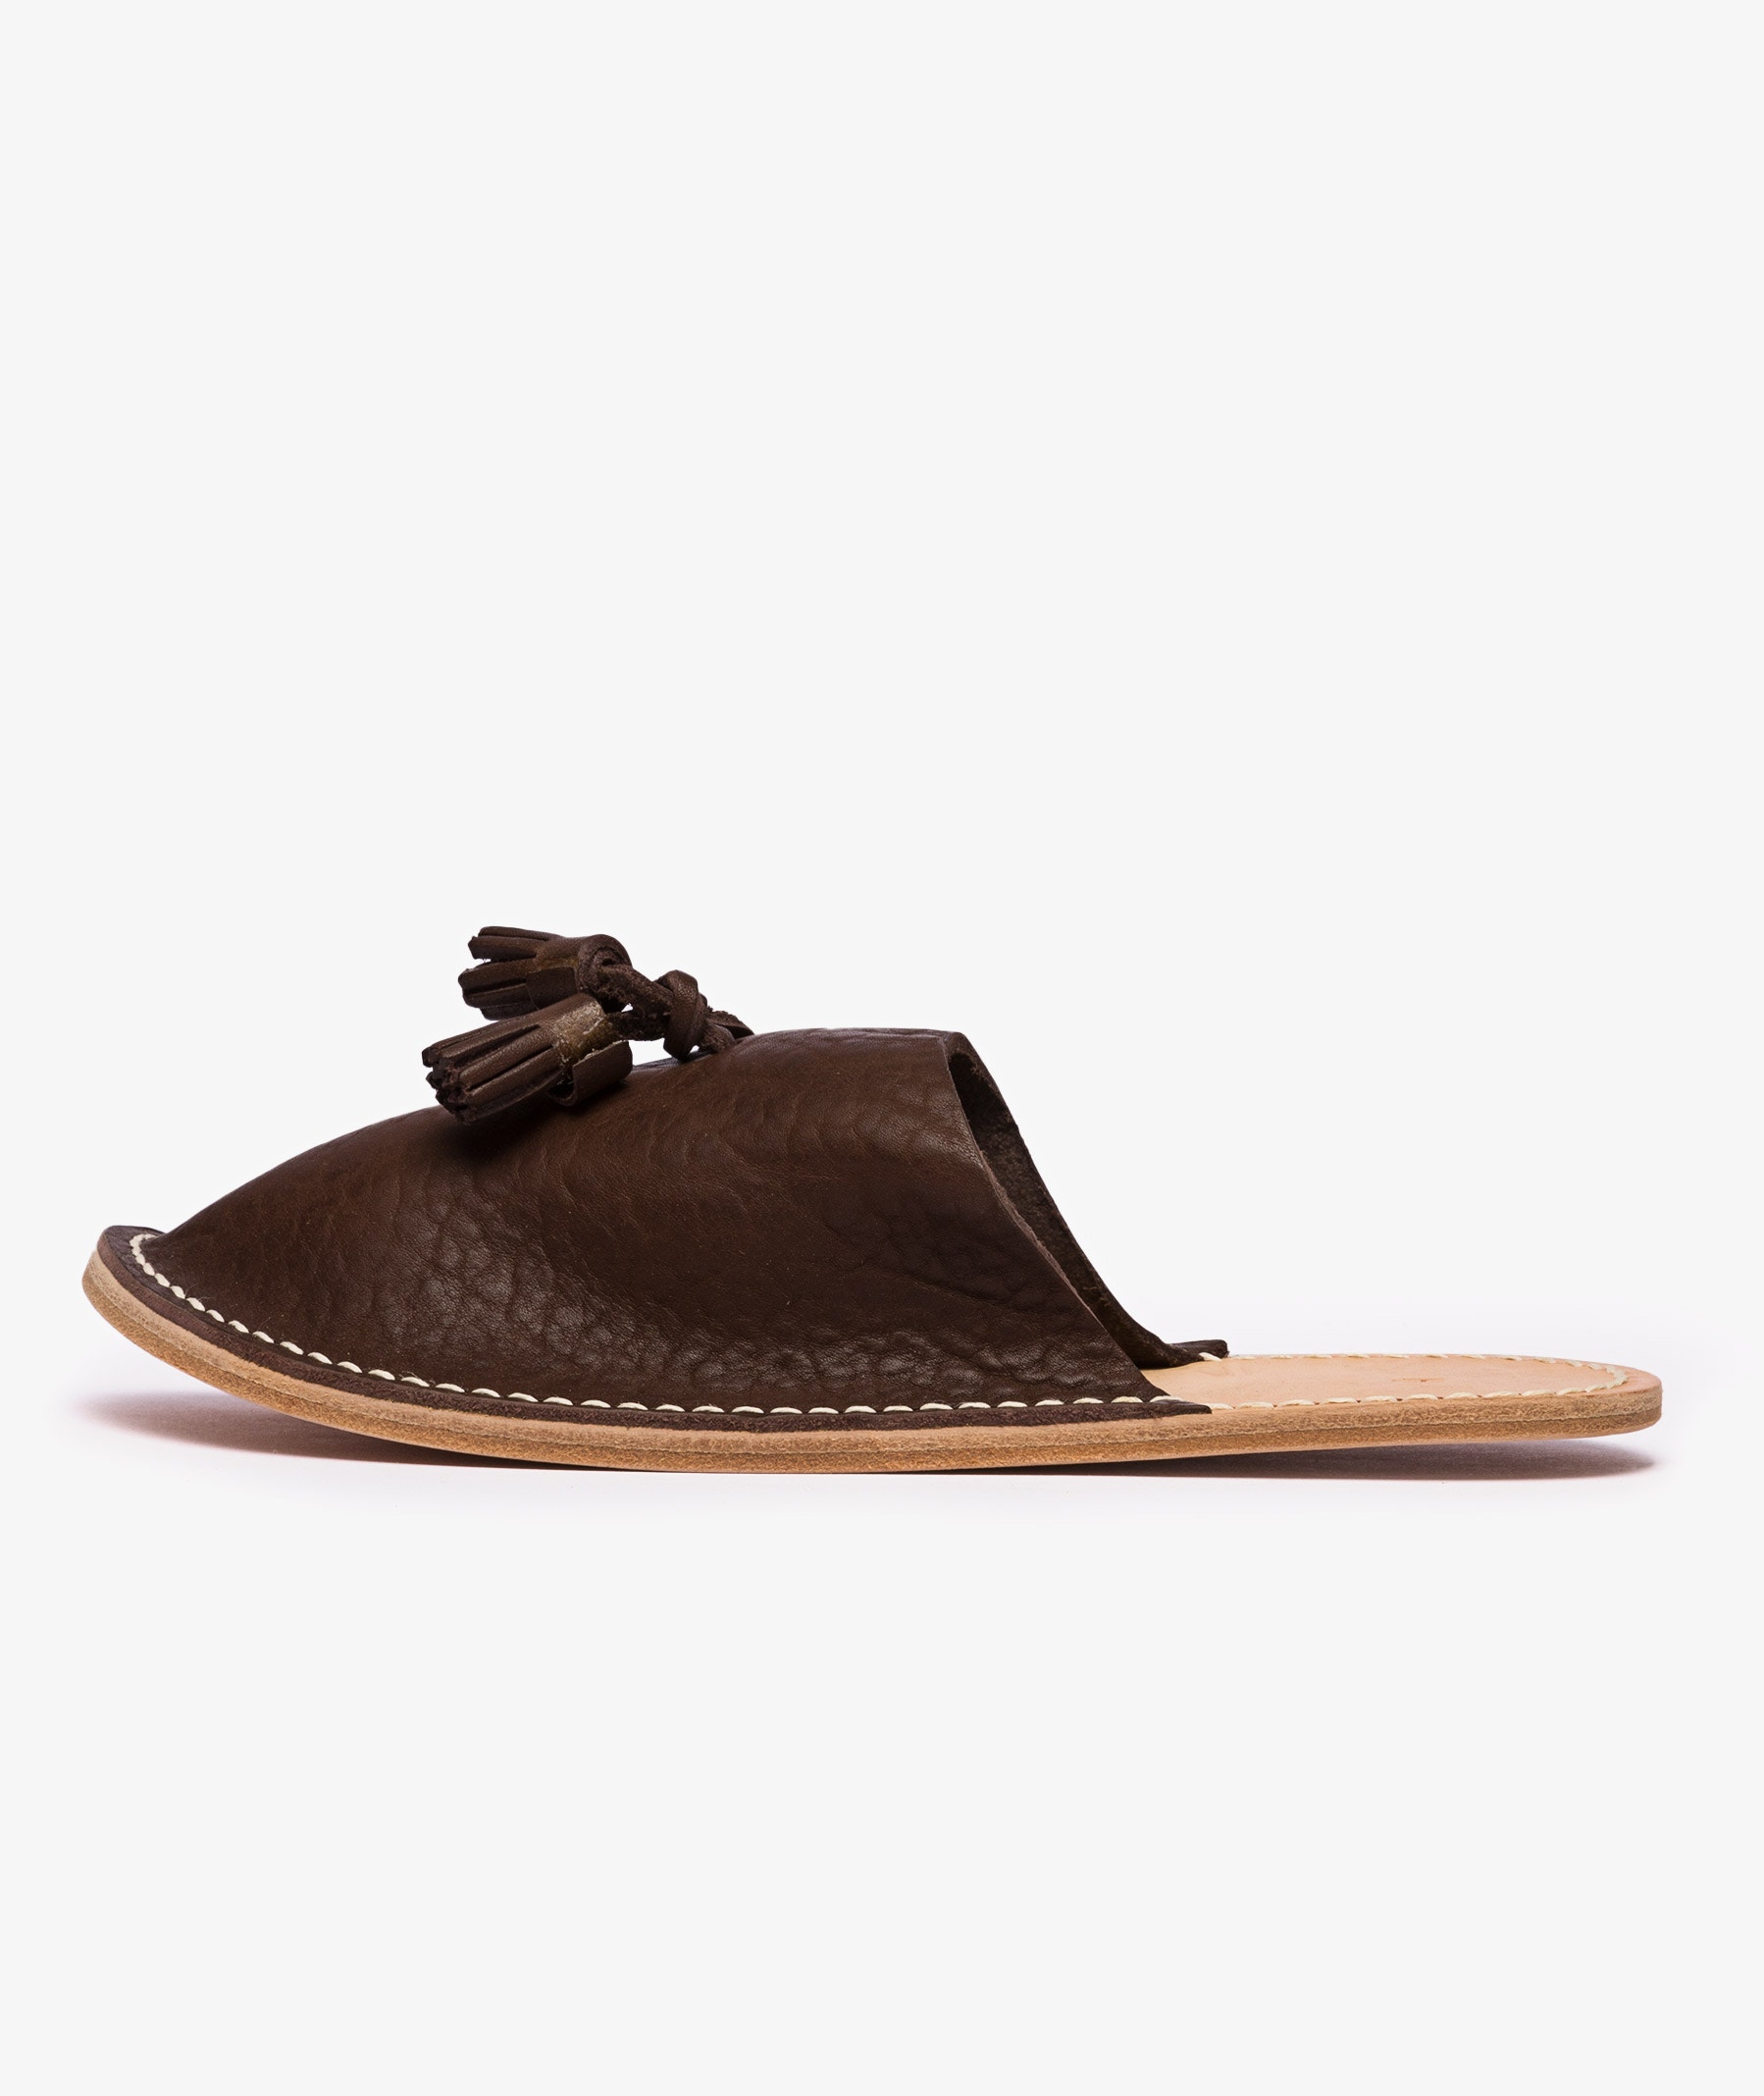 Best-Selling Discount Hender Scheme Leather Slippers delivery to United  States free